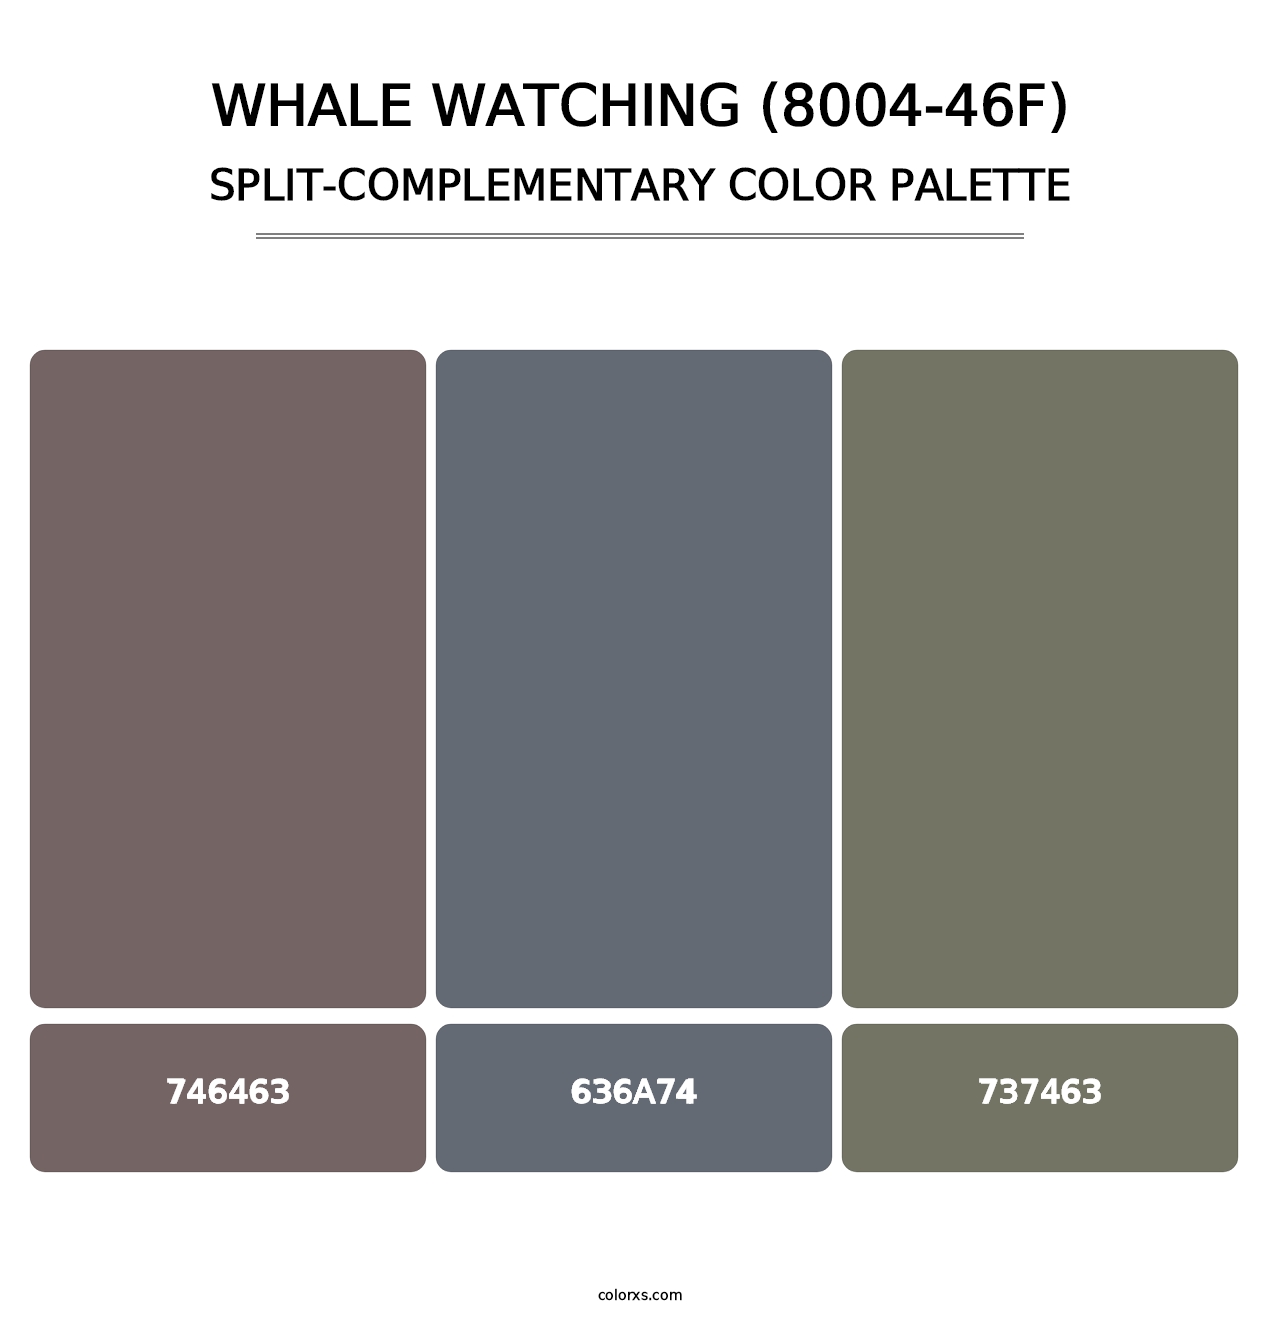 Whale Watching (8004-46F) - Split-Complementary Color Palette